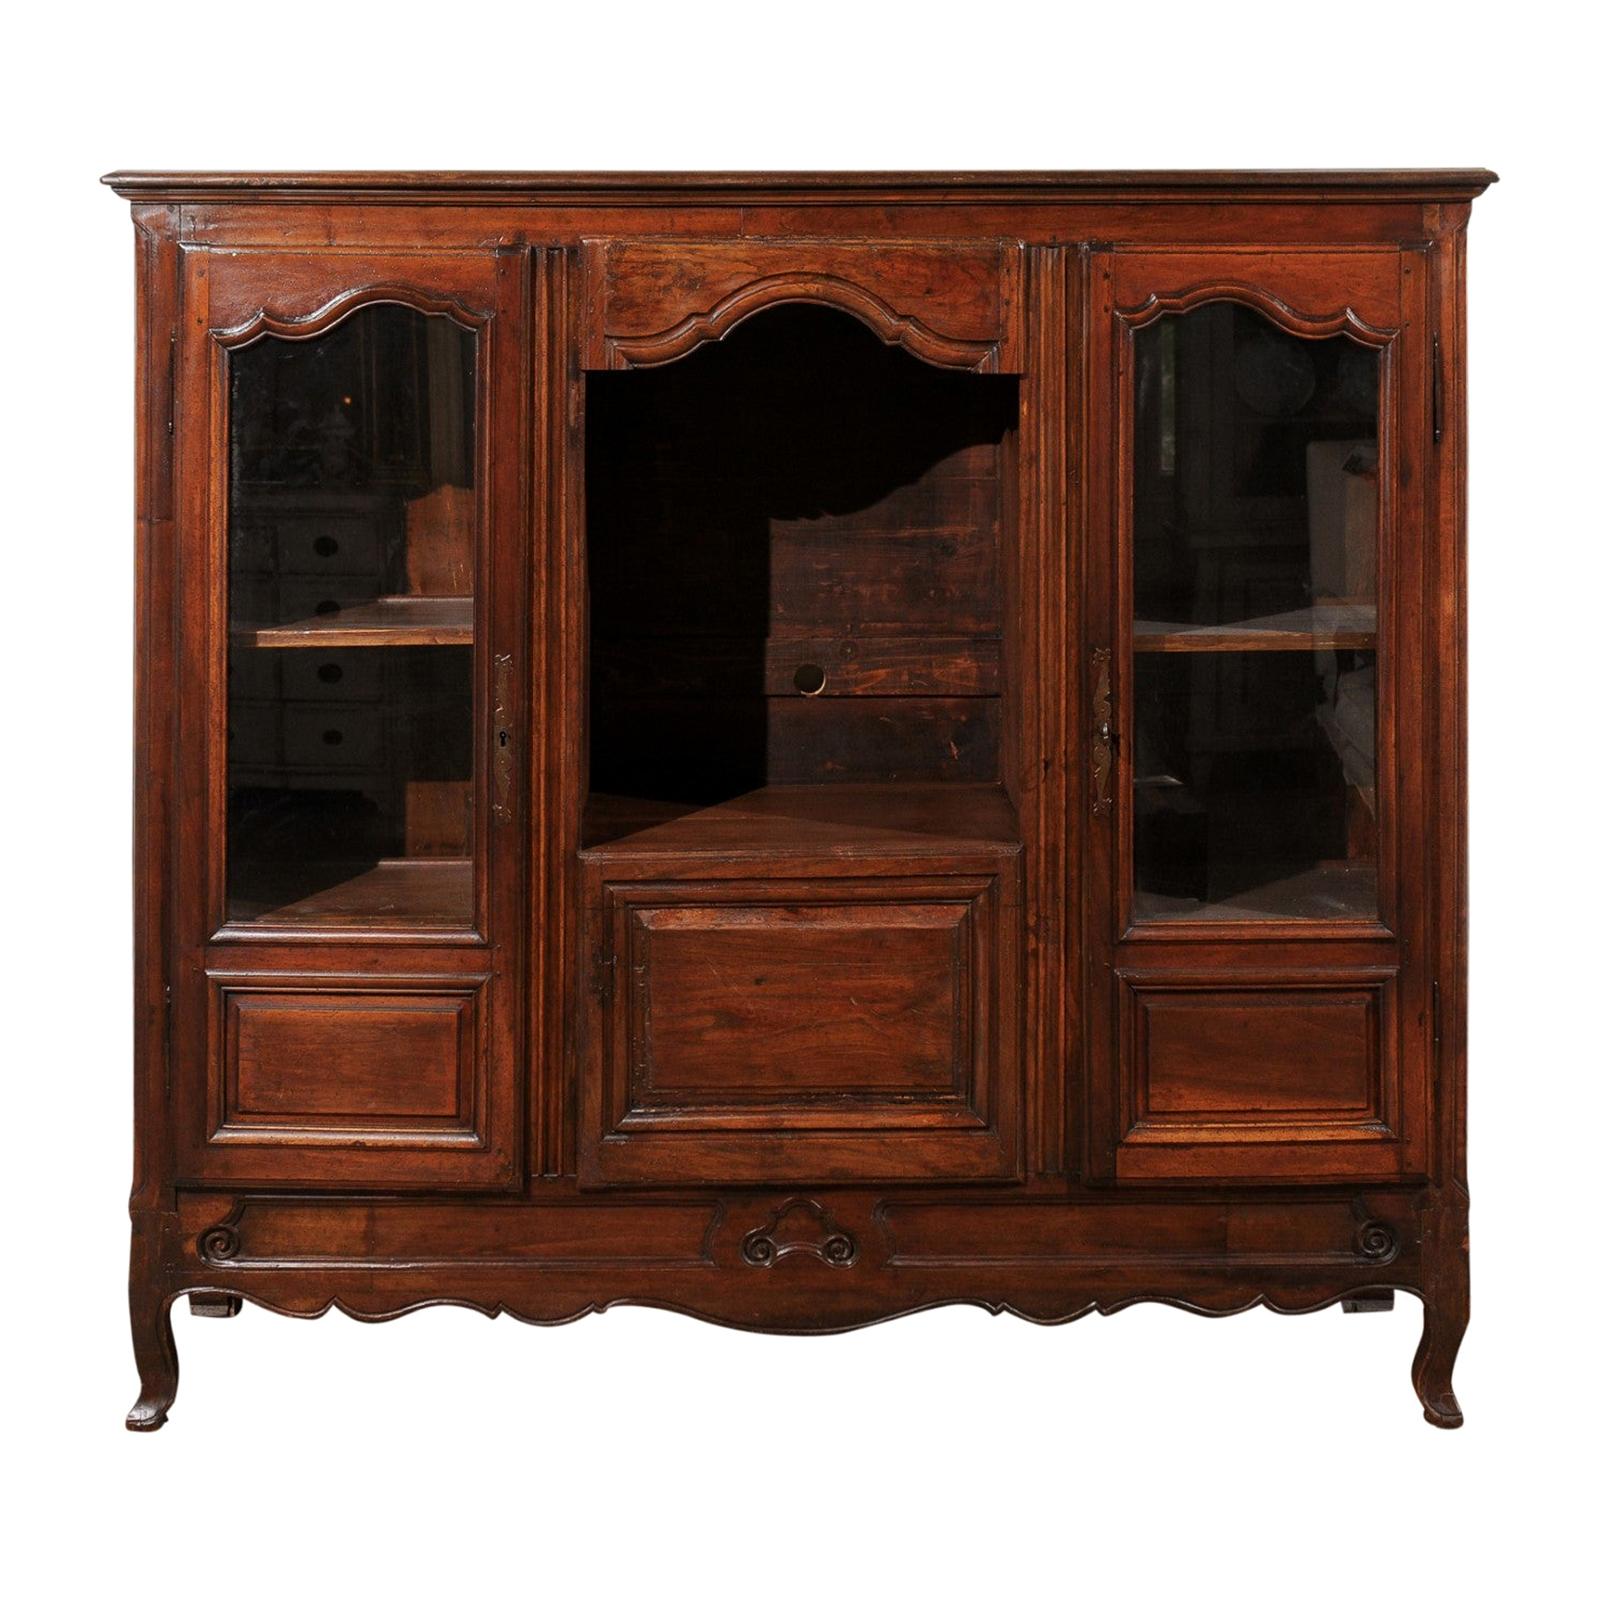 French Provincial 1780s Walnut Bibliothèque with Glass Doors and Open Shelf